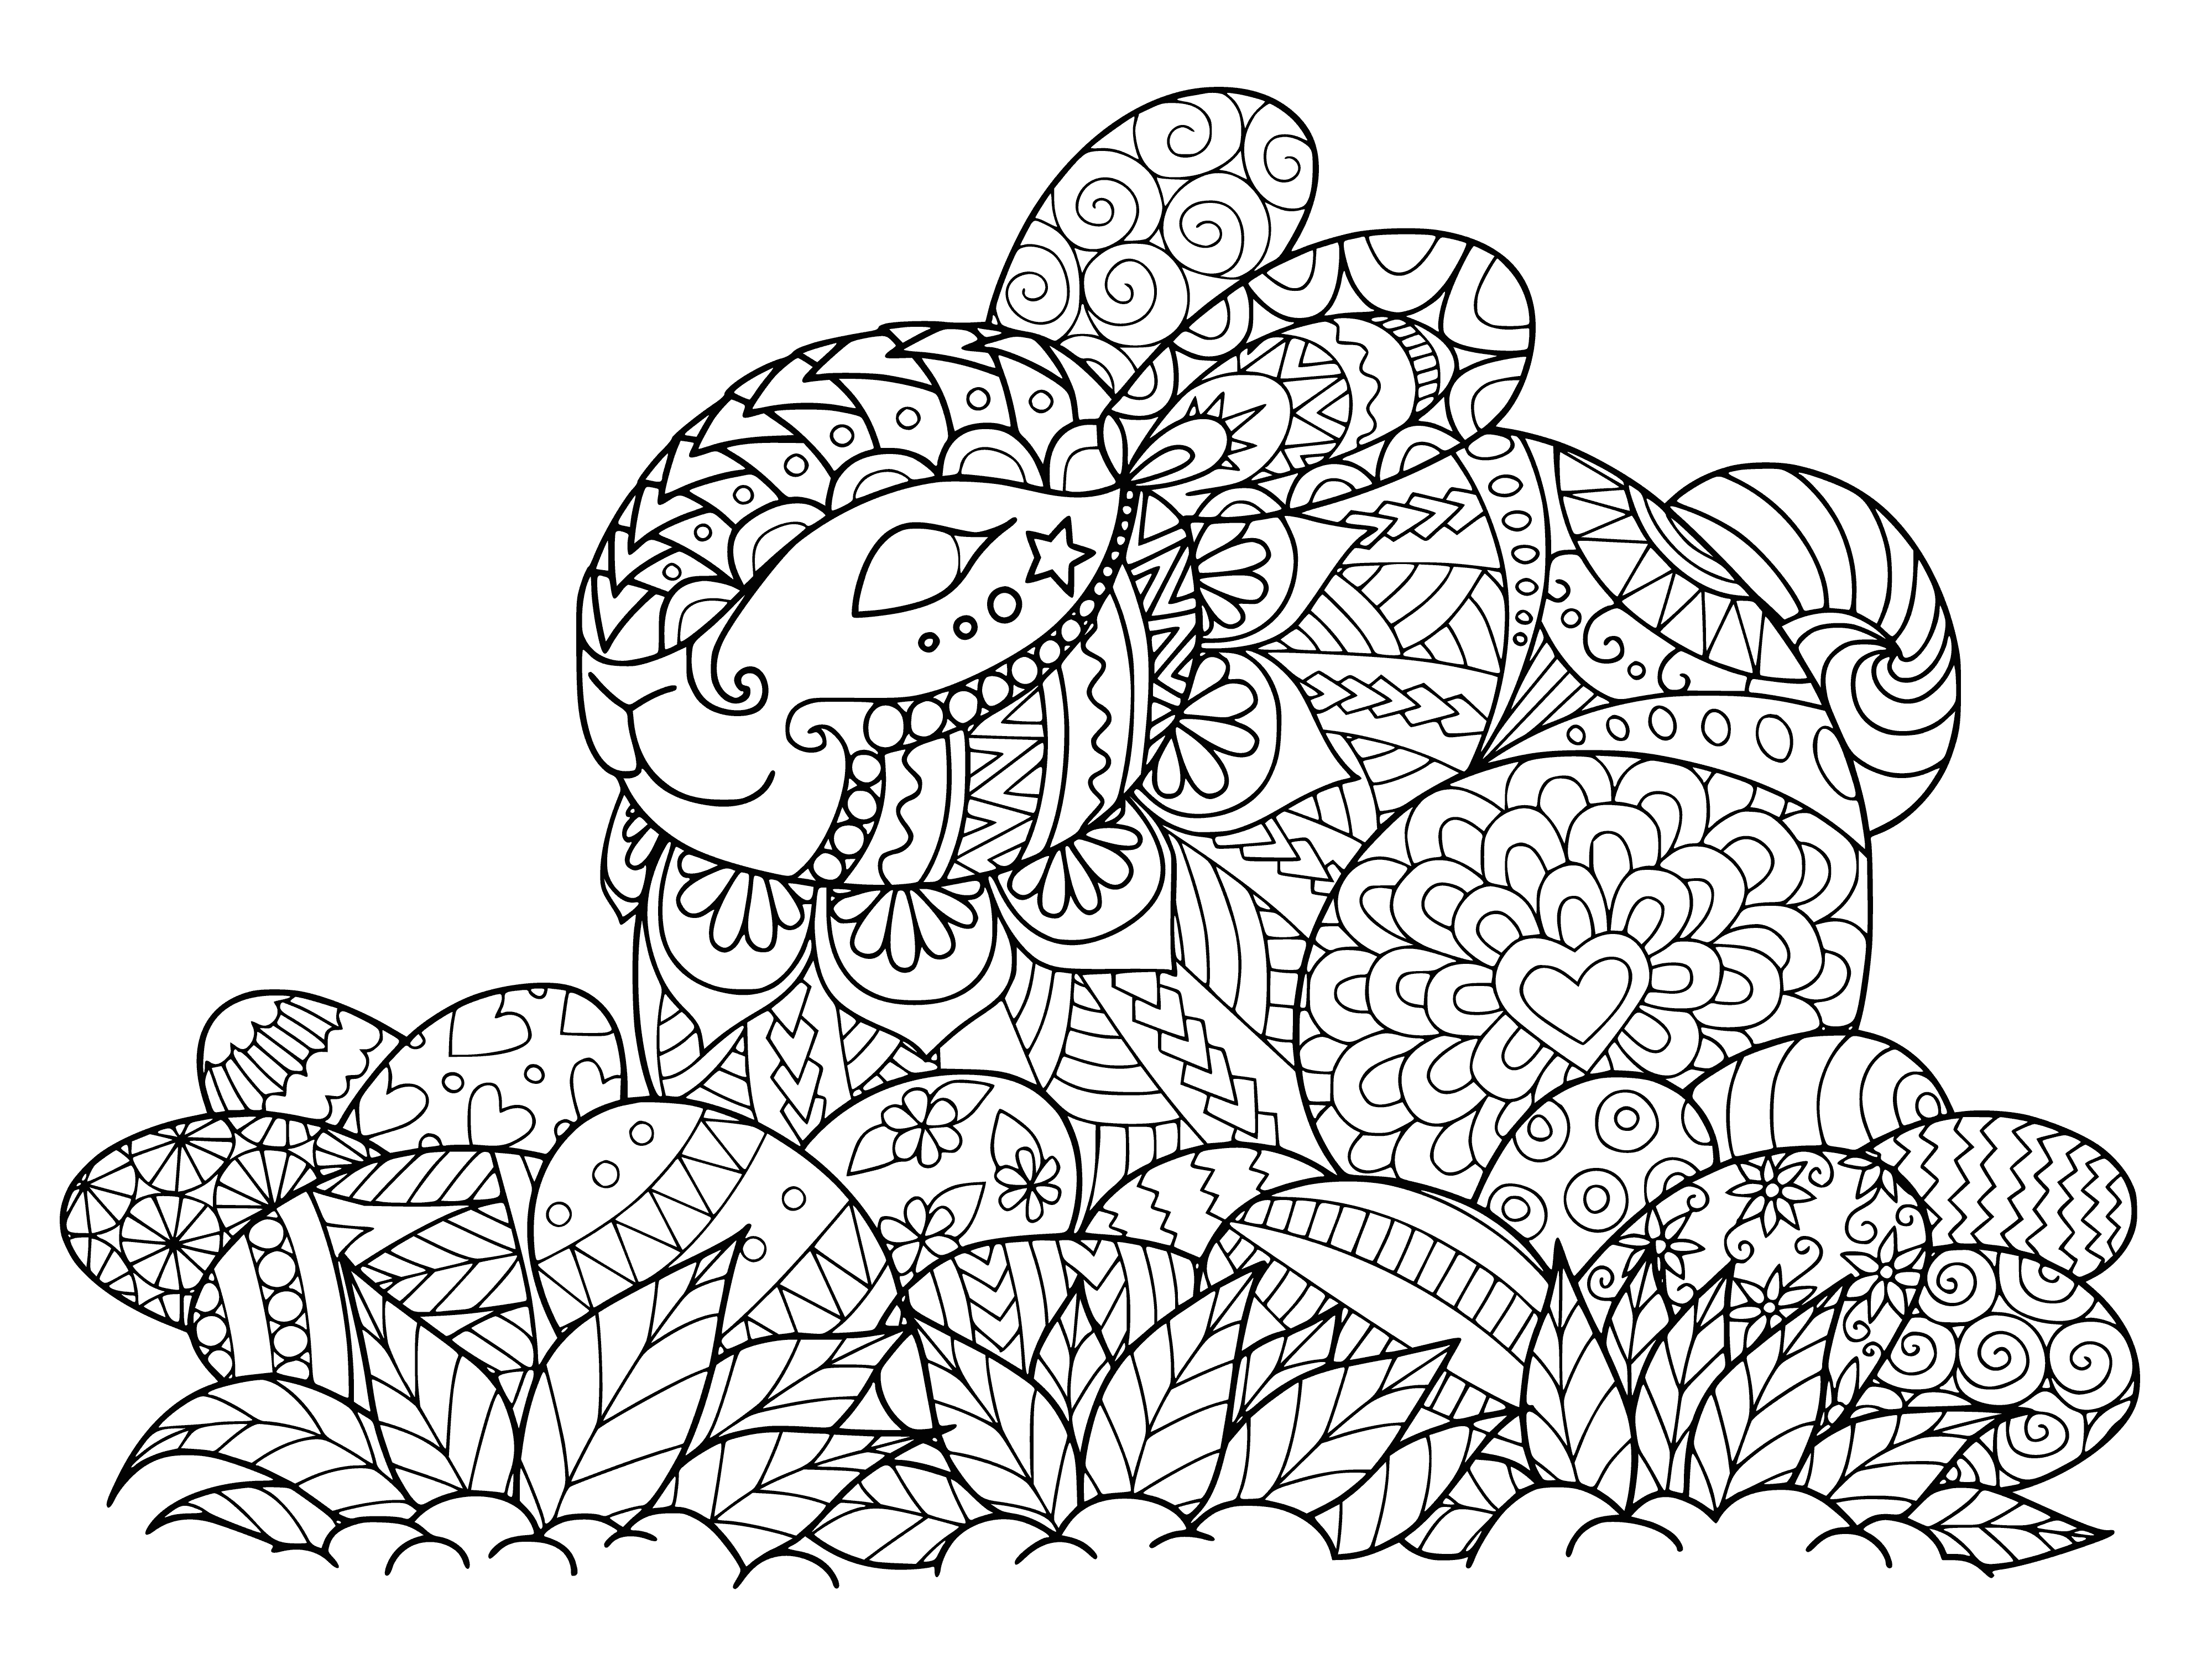 Easter bunny coloring page